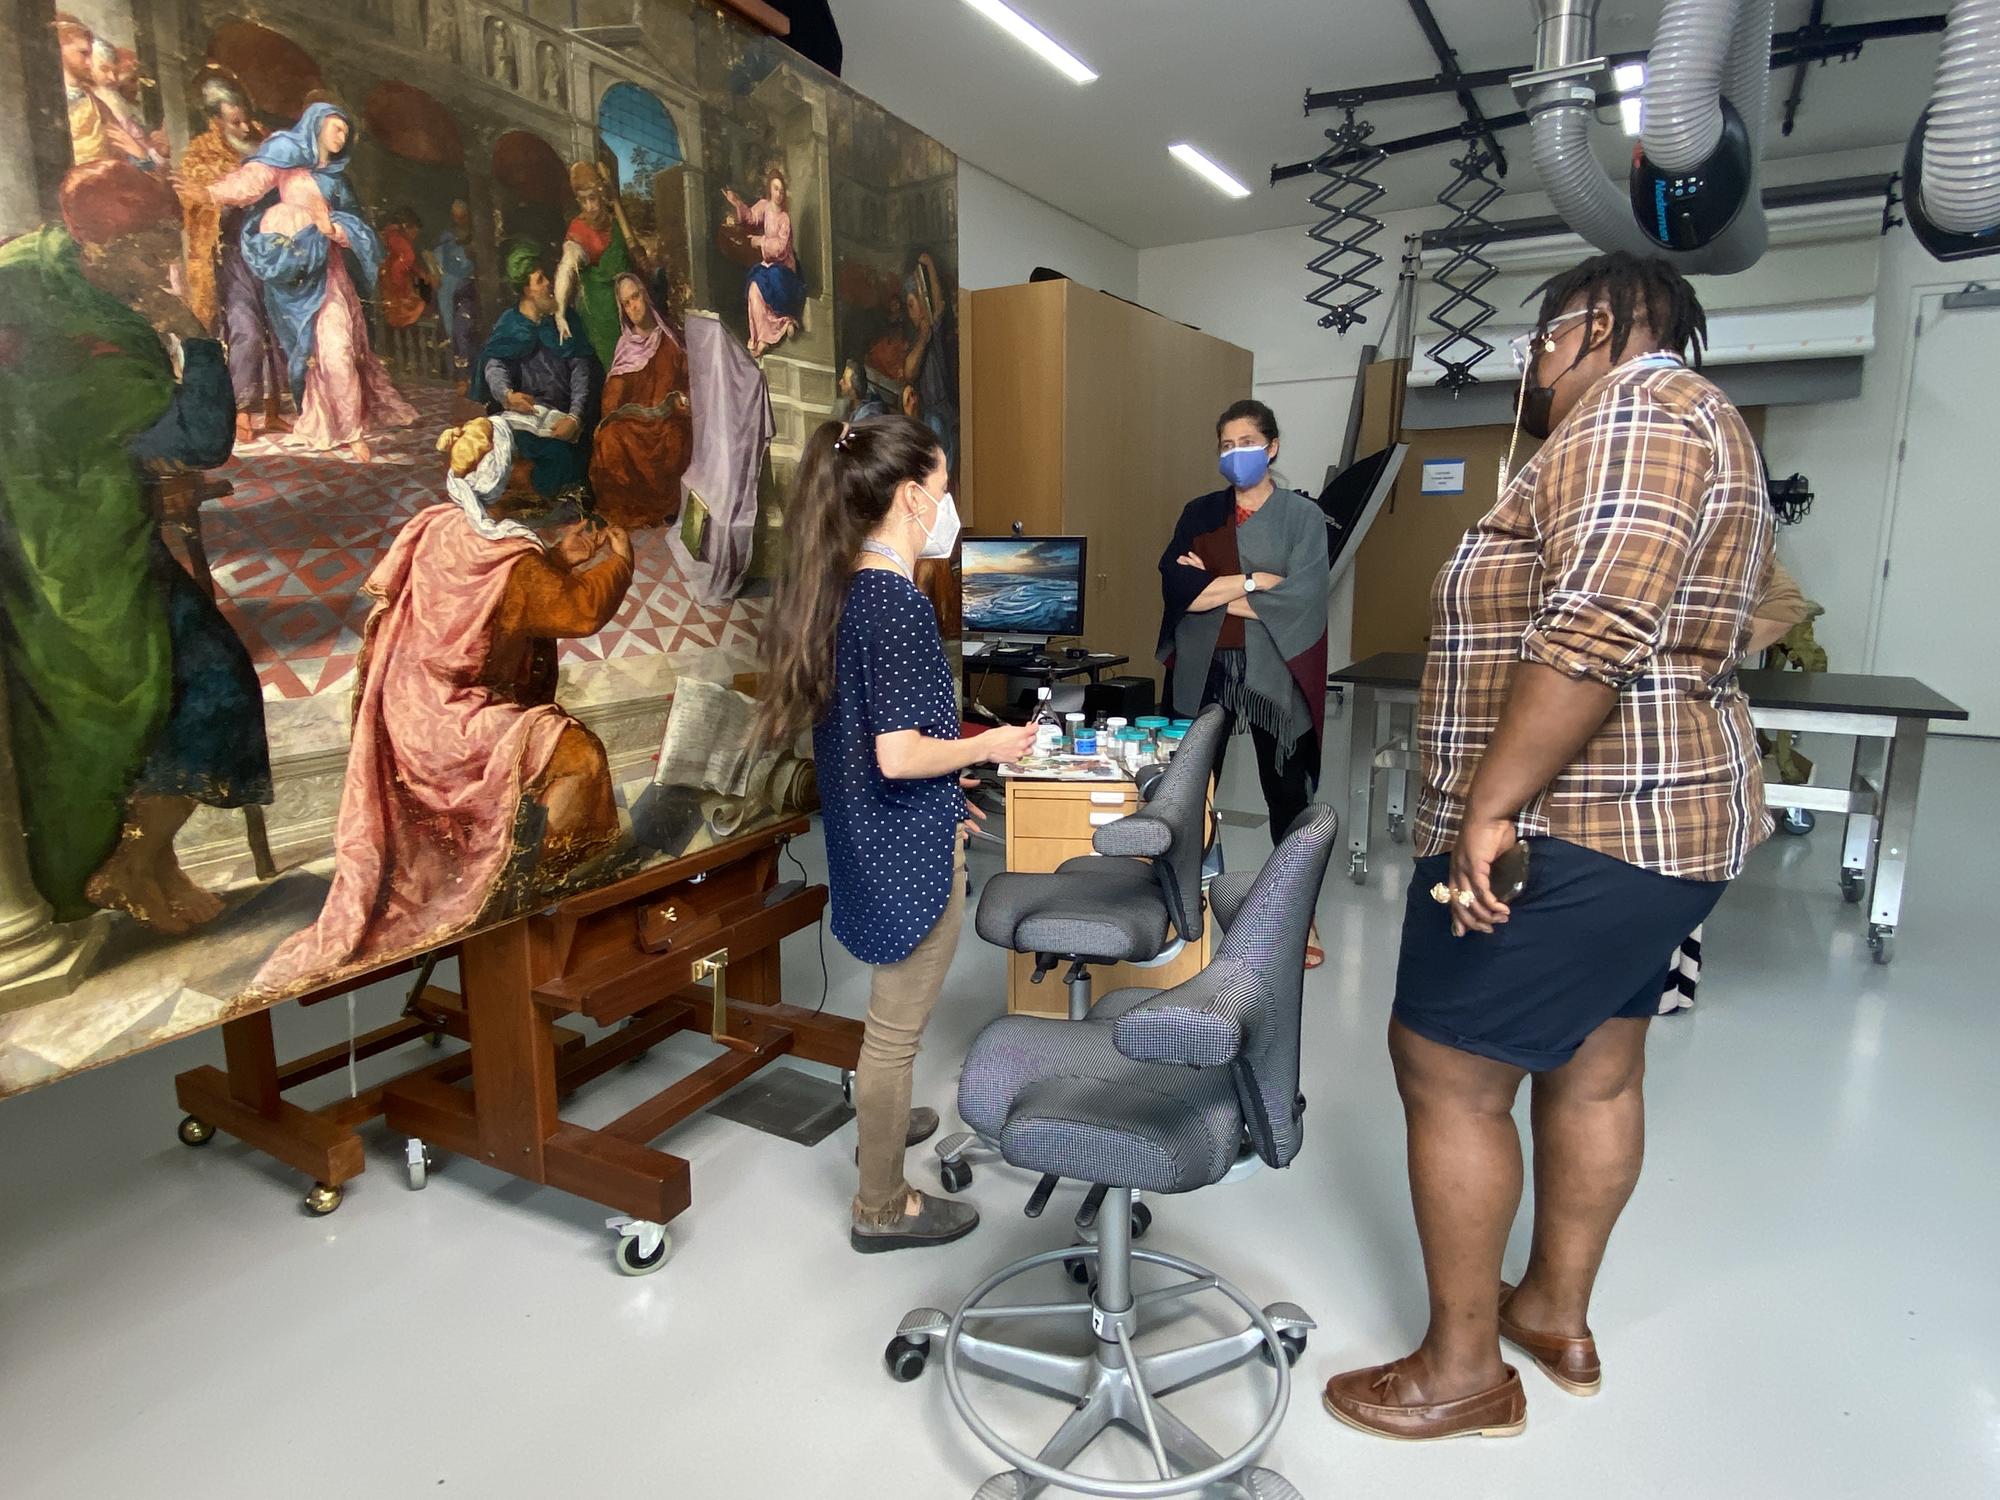 Porsha Olayiwola talks to conservators with a colorful painting behind them.